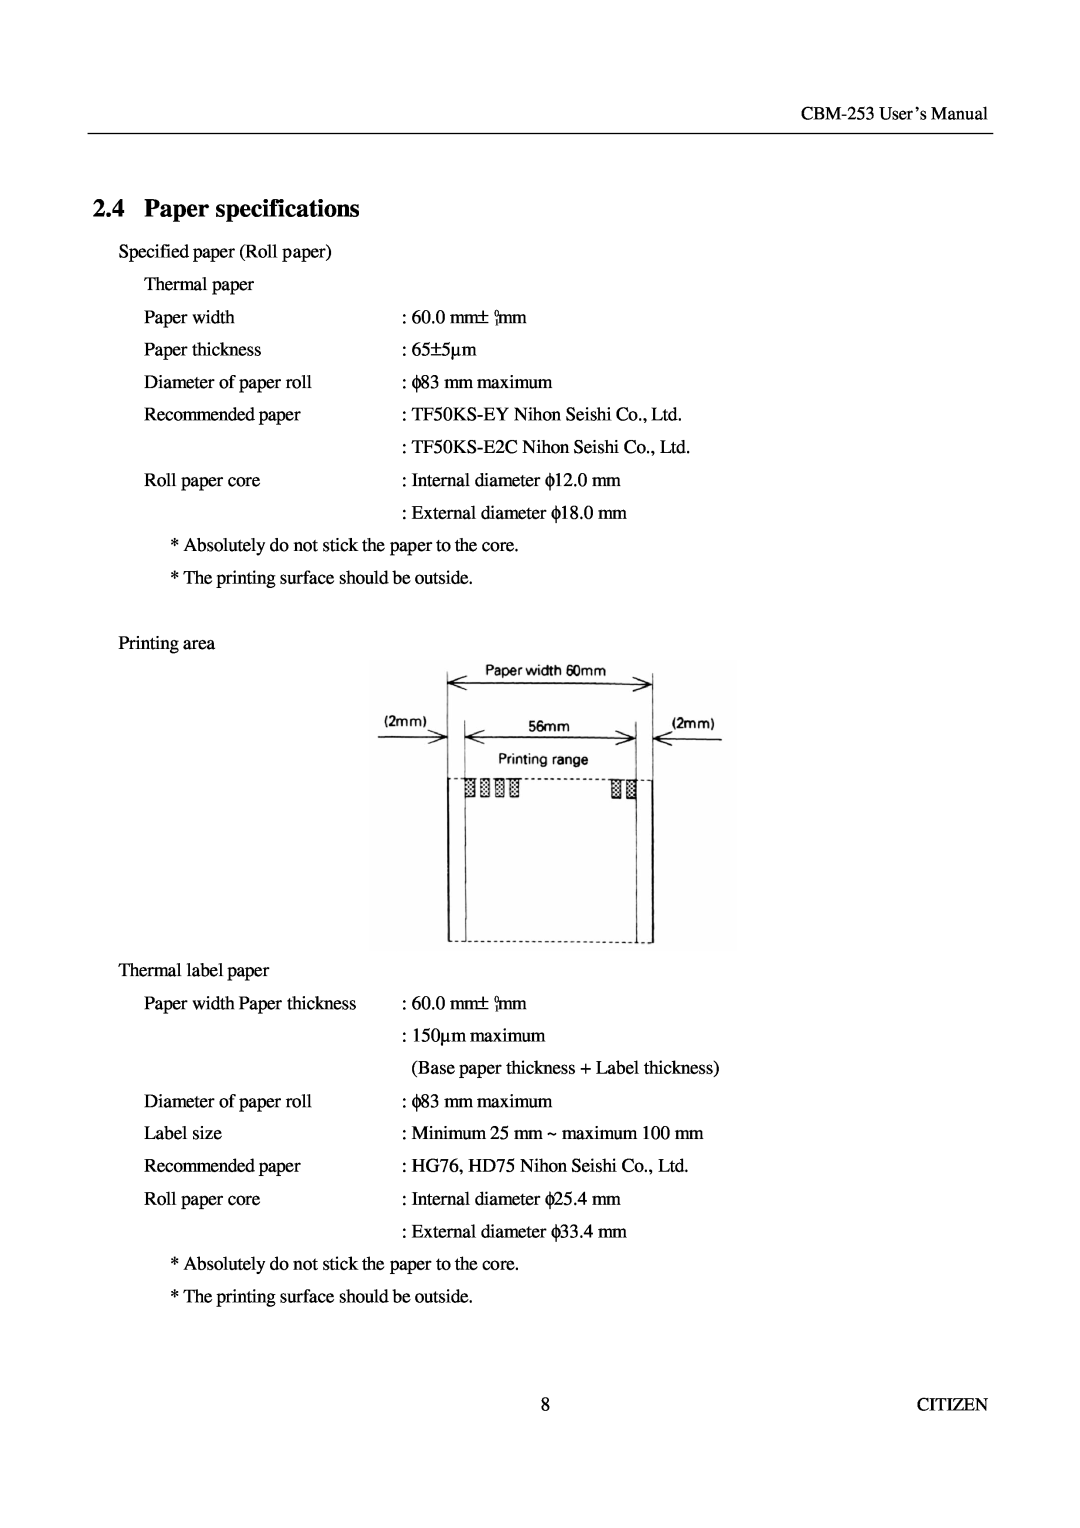 Citizen Systems CBM-253 manual Paper specifications 